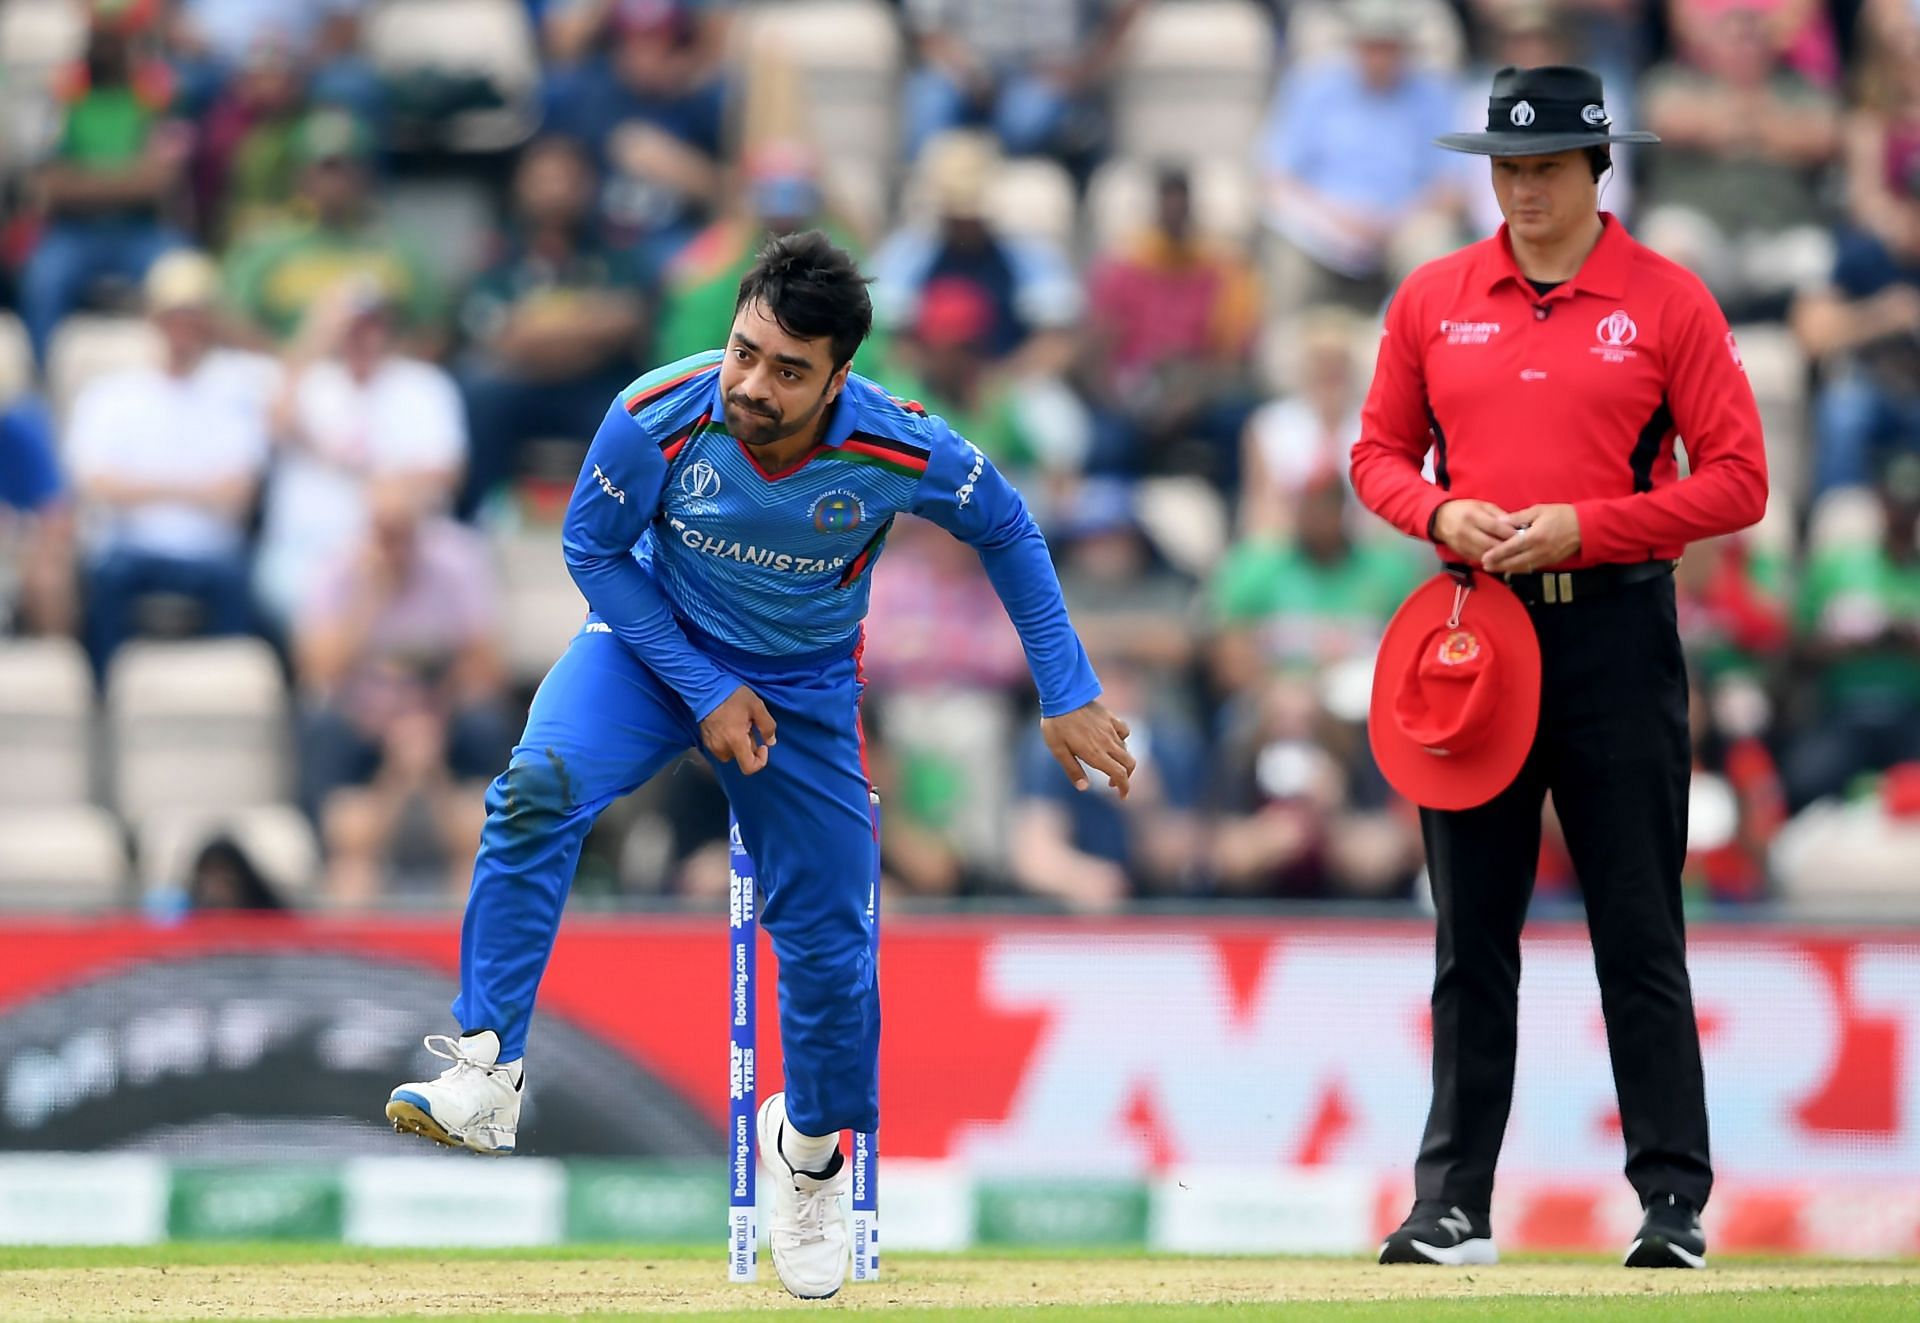 Rashid Khan will hope to continue his IPL form for Afghanistan (Credit: Getty Images)